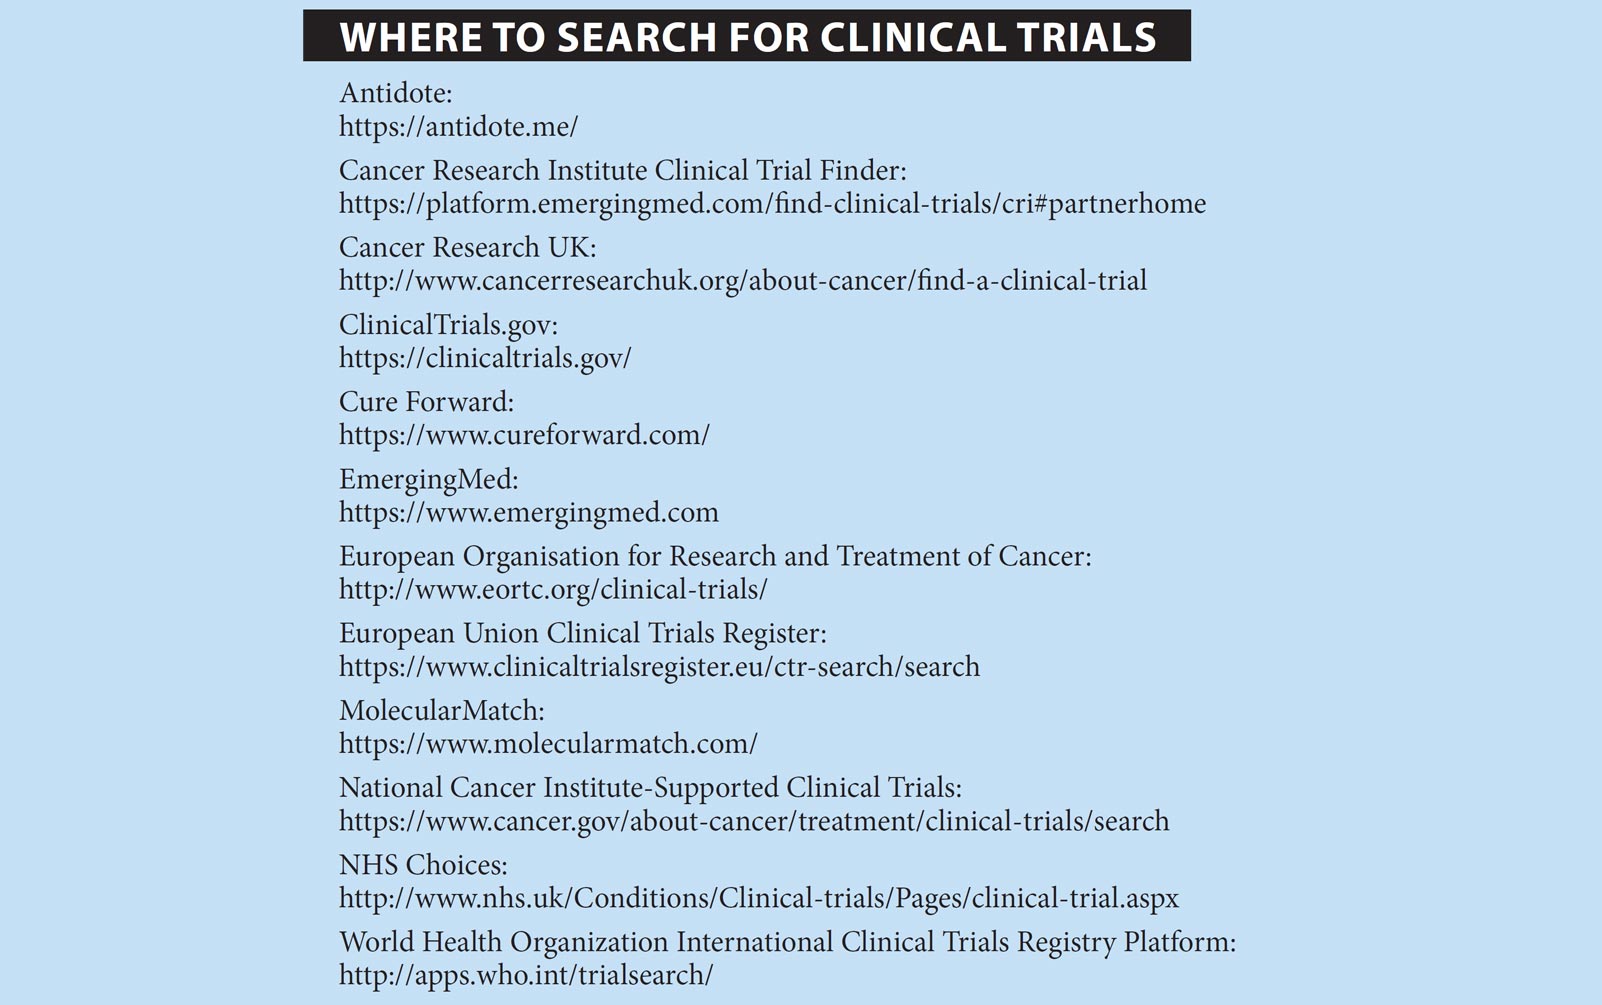 Efforts Aim to Make Clinical Trial Information More Accessible